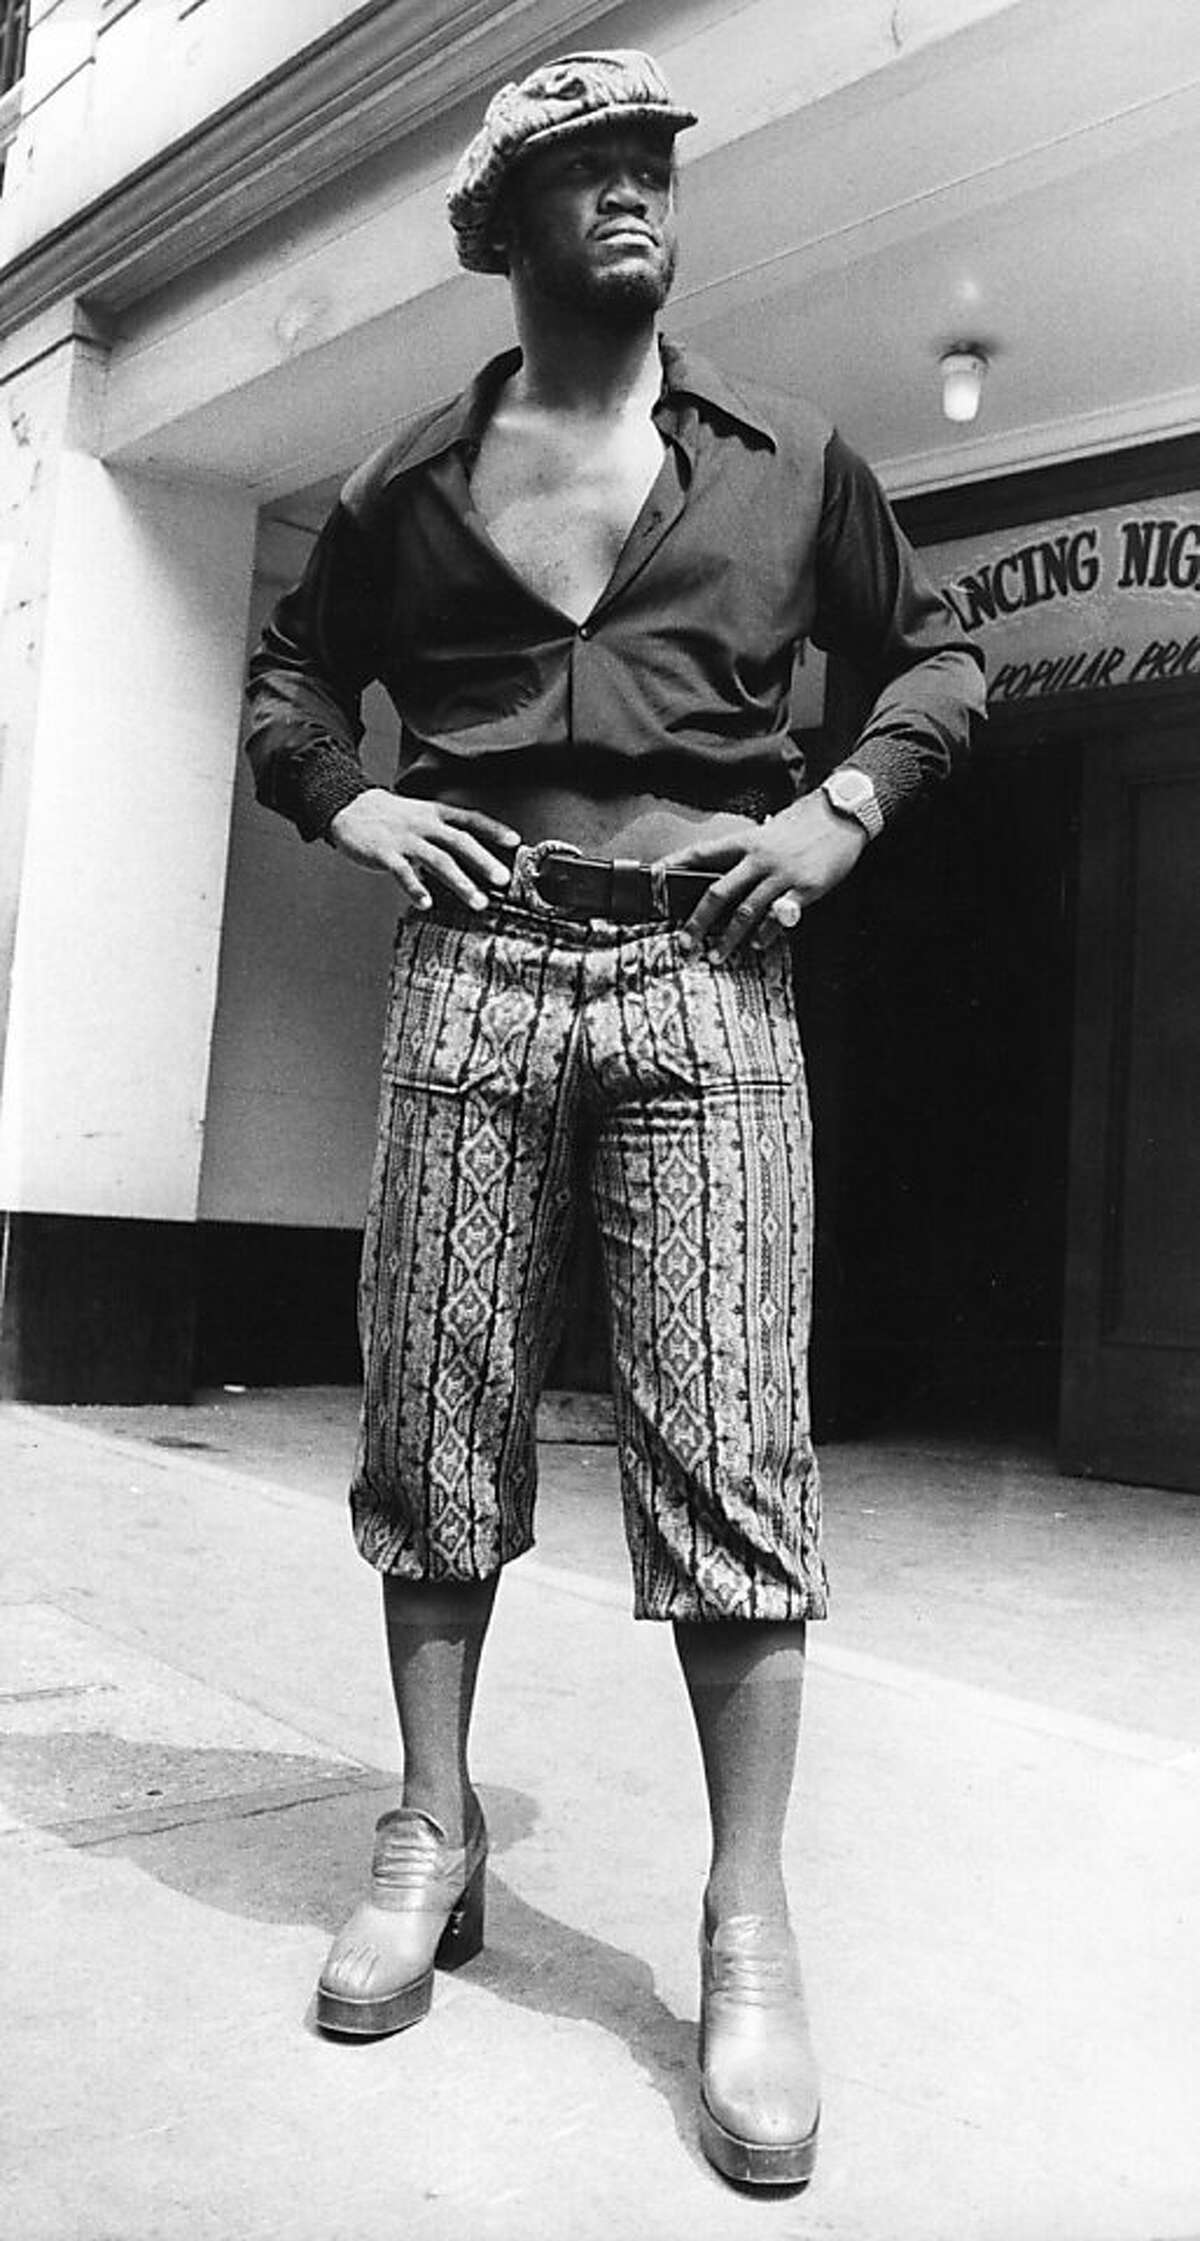 FILE: 26th June 1973: World Champion Heavyweight boxer Joe Frazier models clothing at Leicester Square Empire Ballroom. It was reported that former heavyweight champion Joe Frazier has died after being diagnosed with liver cancer November 7, 2011. (Photo by Keystone/Getty Images)